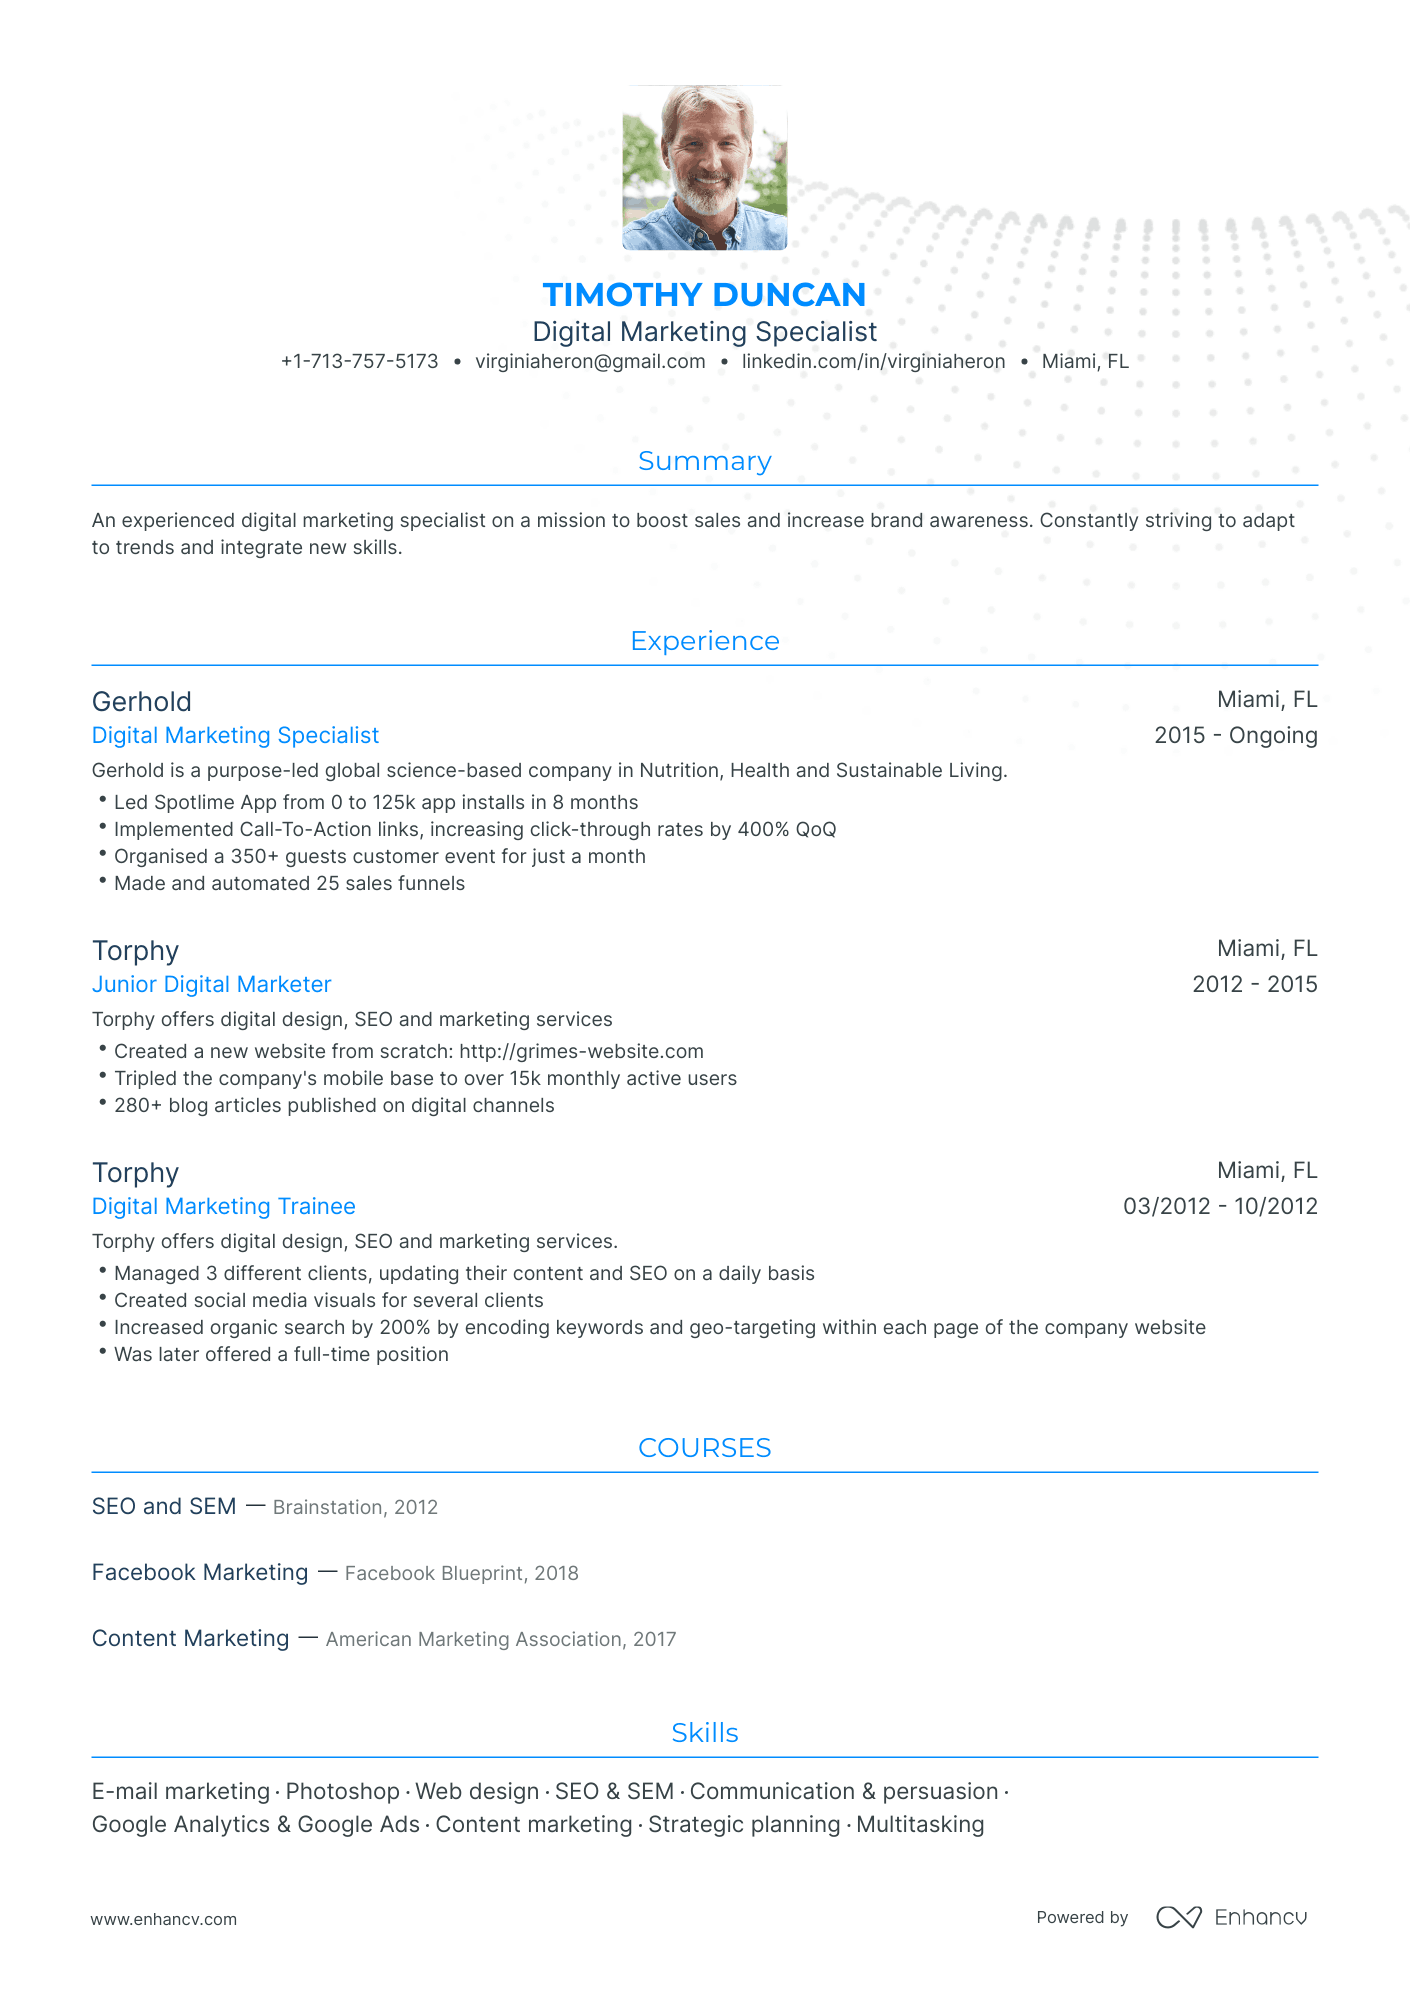 Traditional Digital Marketing Specialist Resume Template